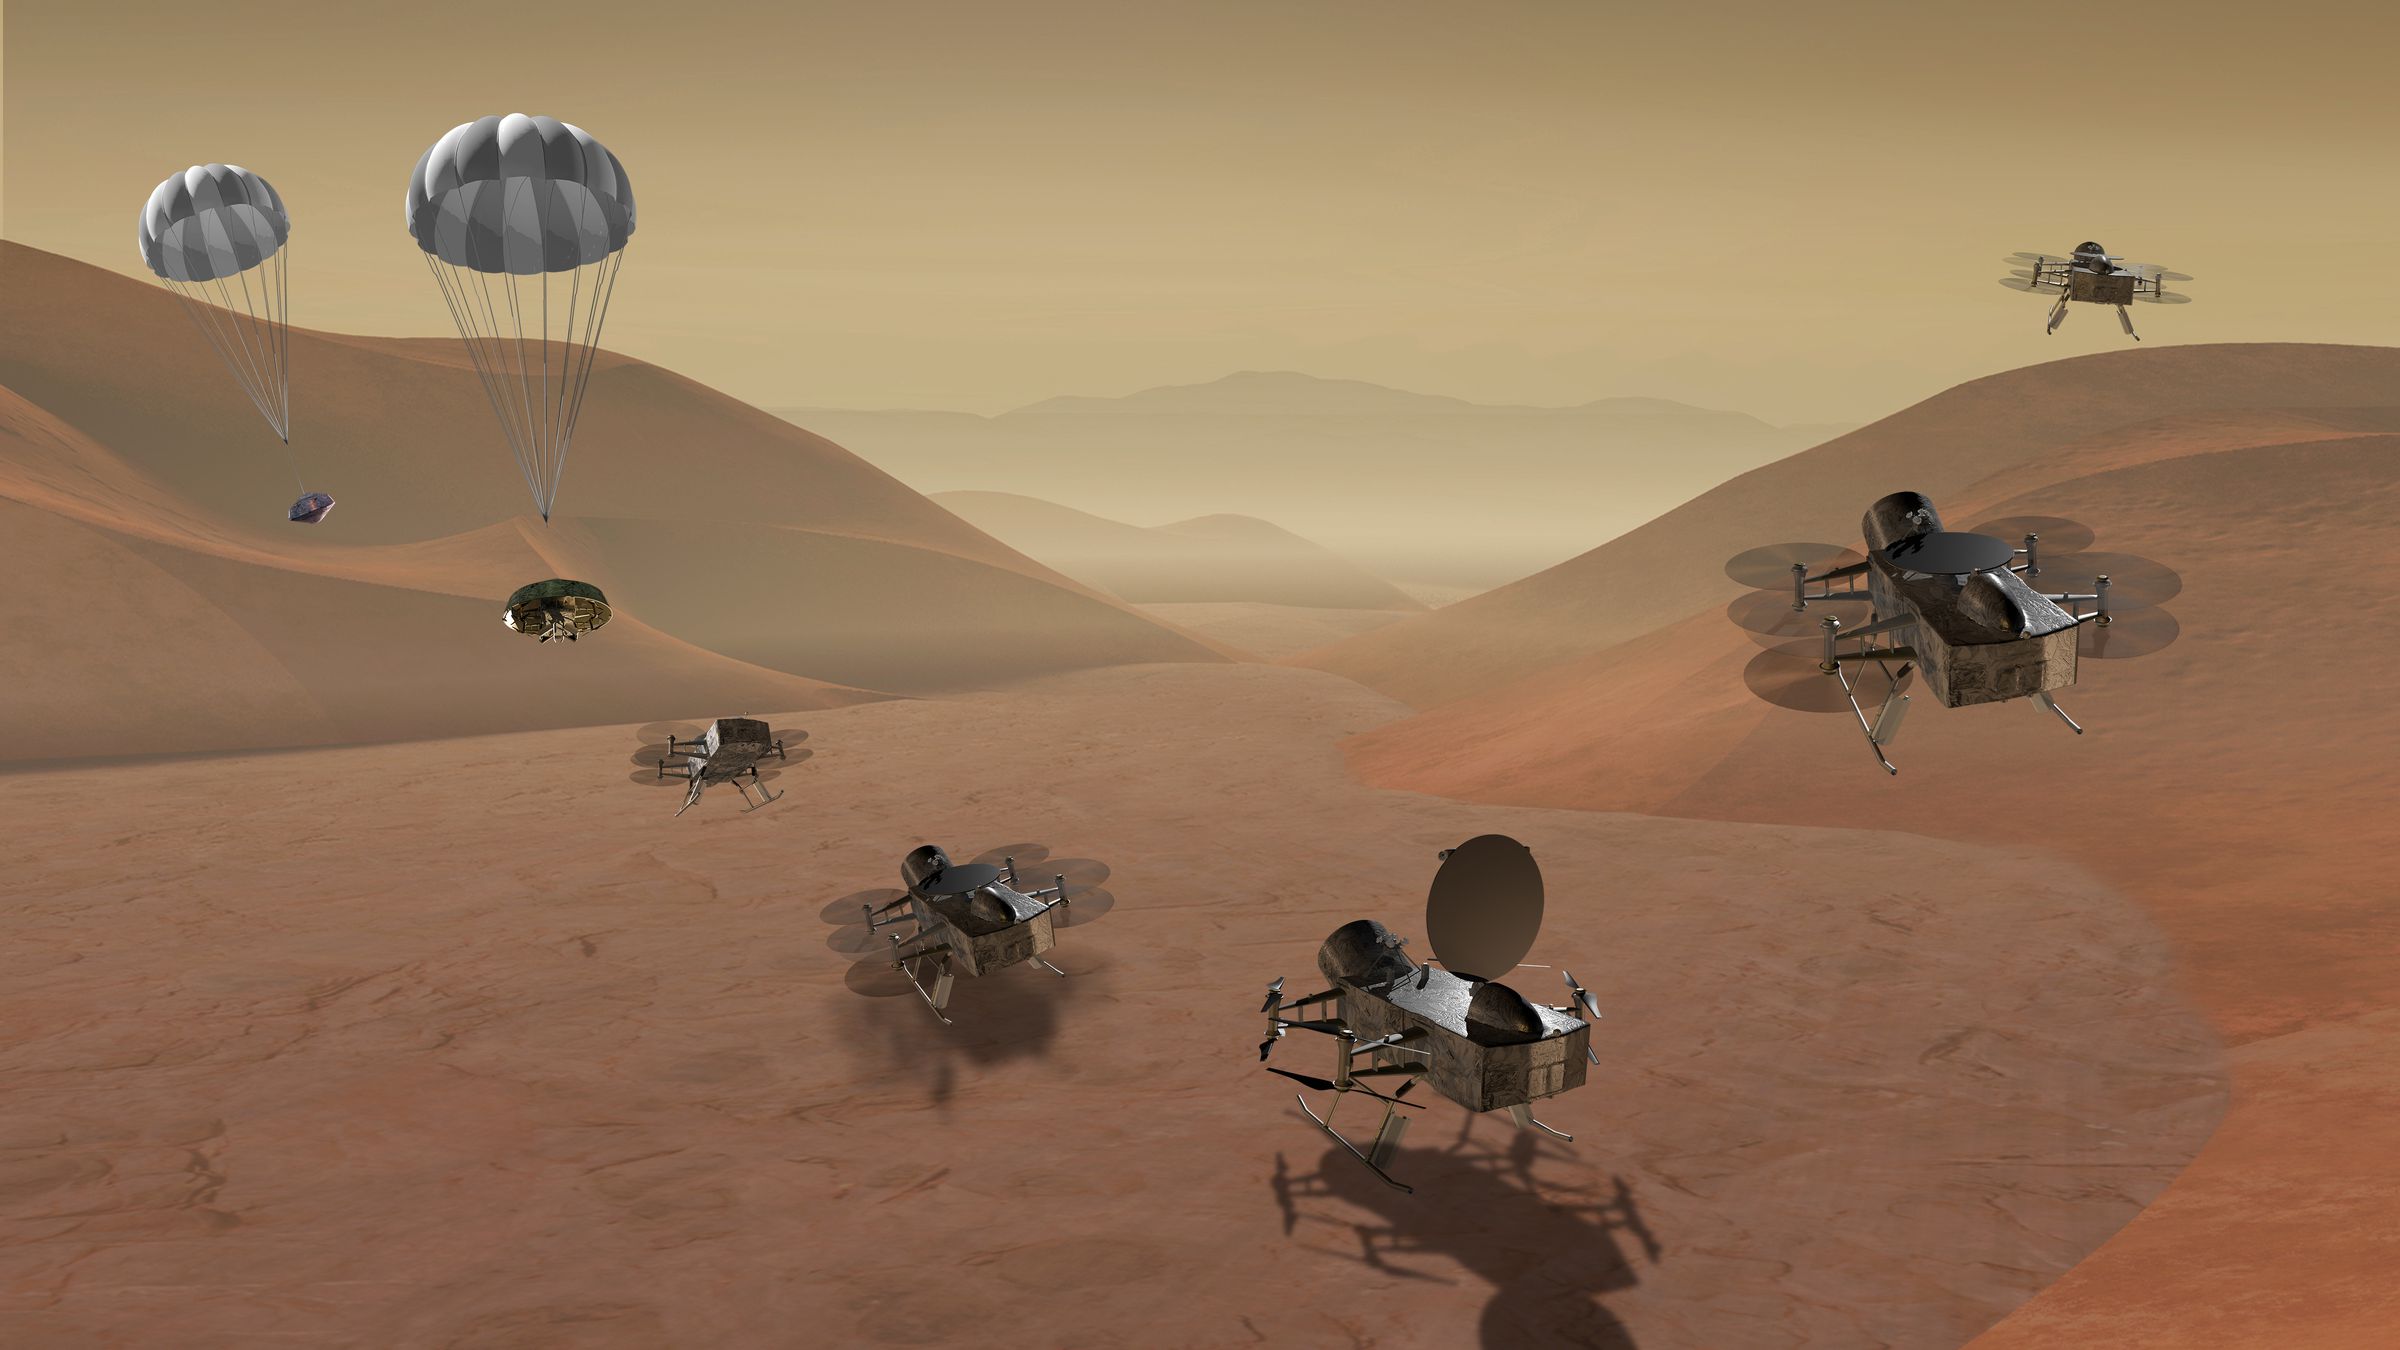 An illustration of the Dragonfly lander on the surface of Saturn’s moon Titan.